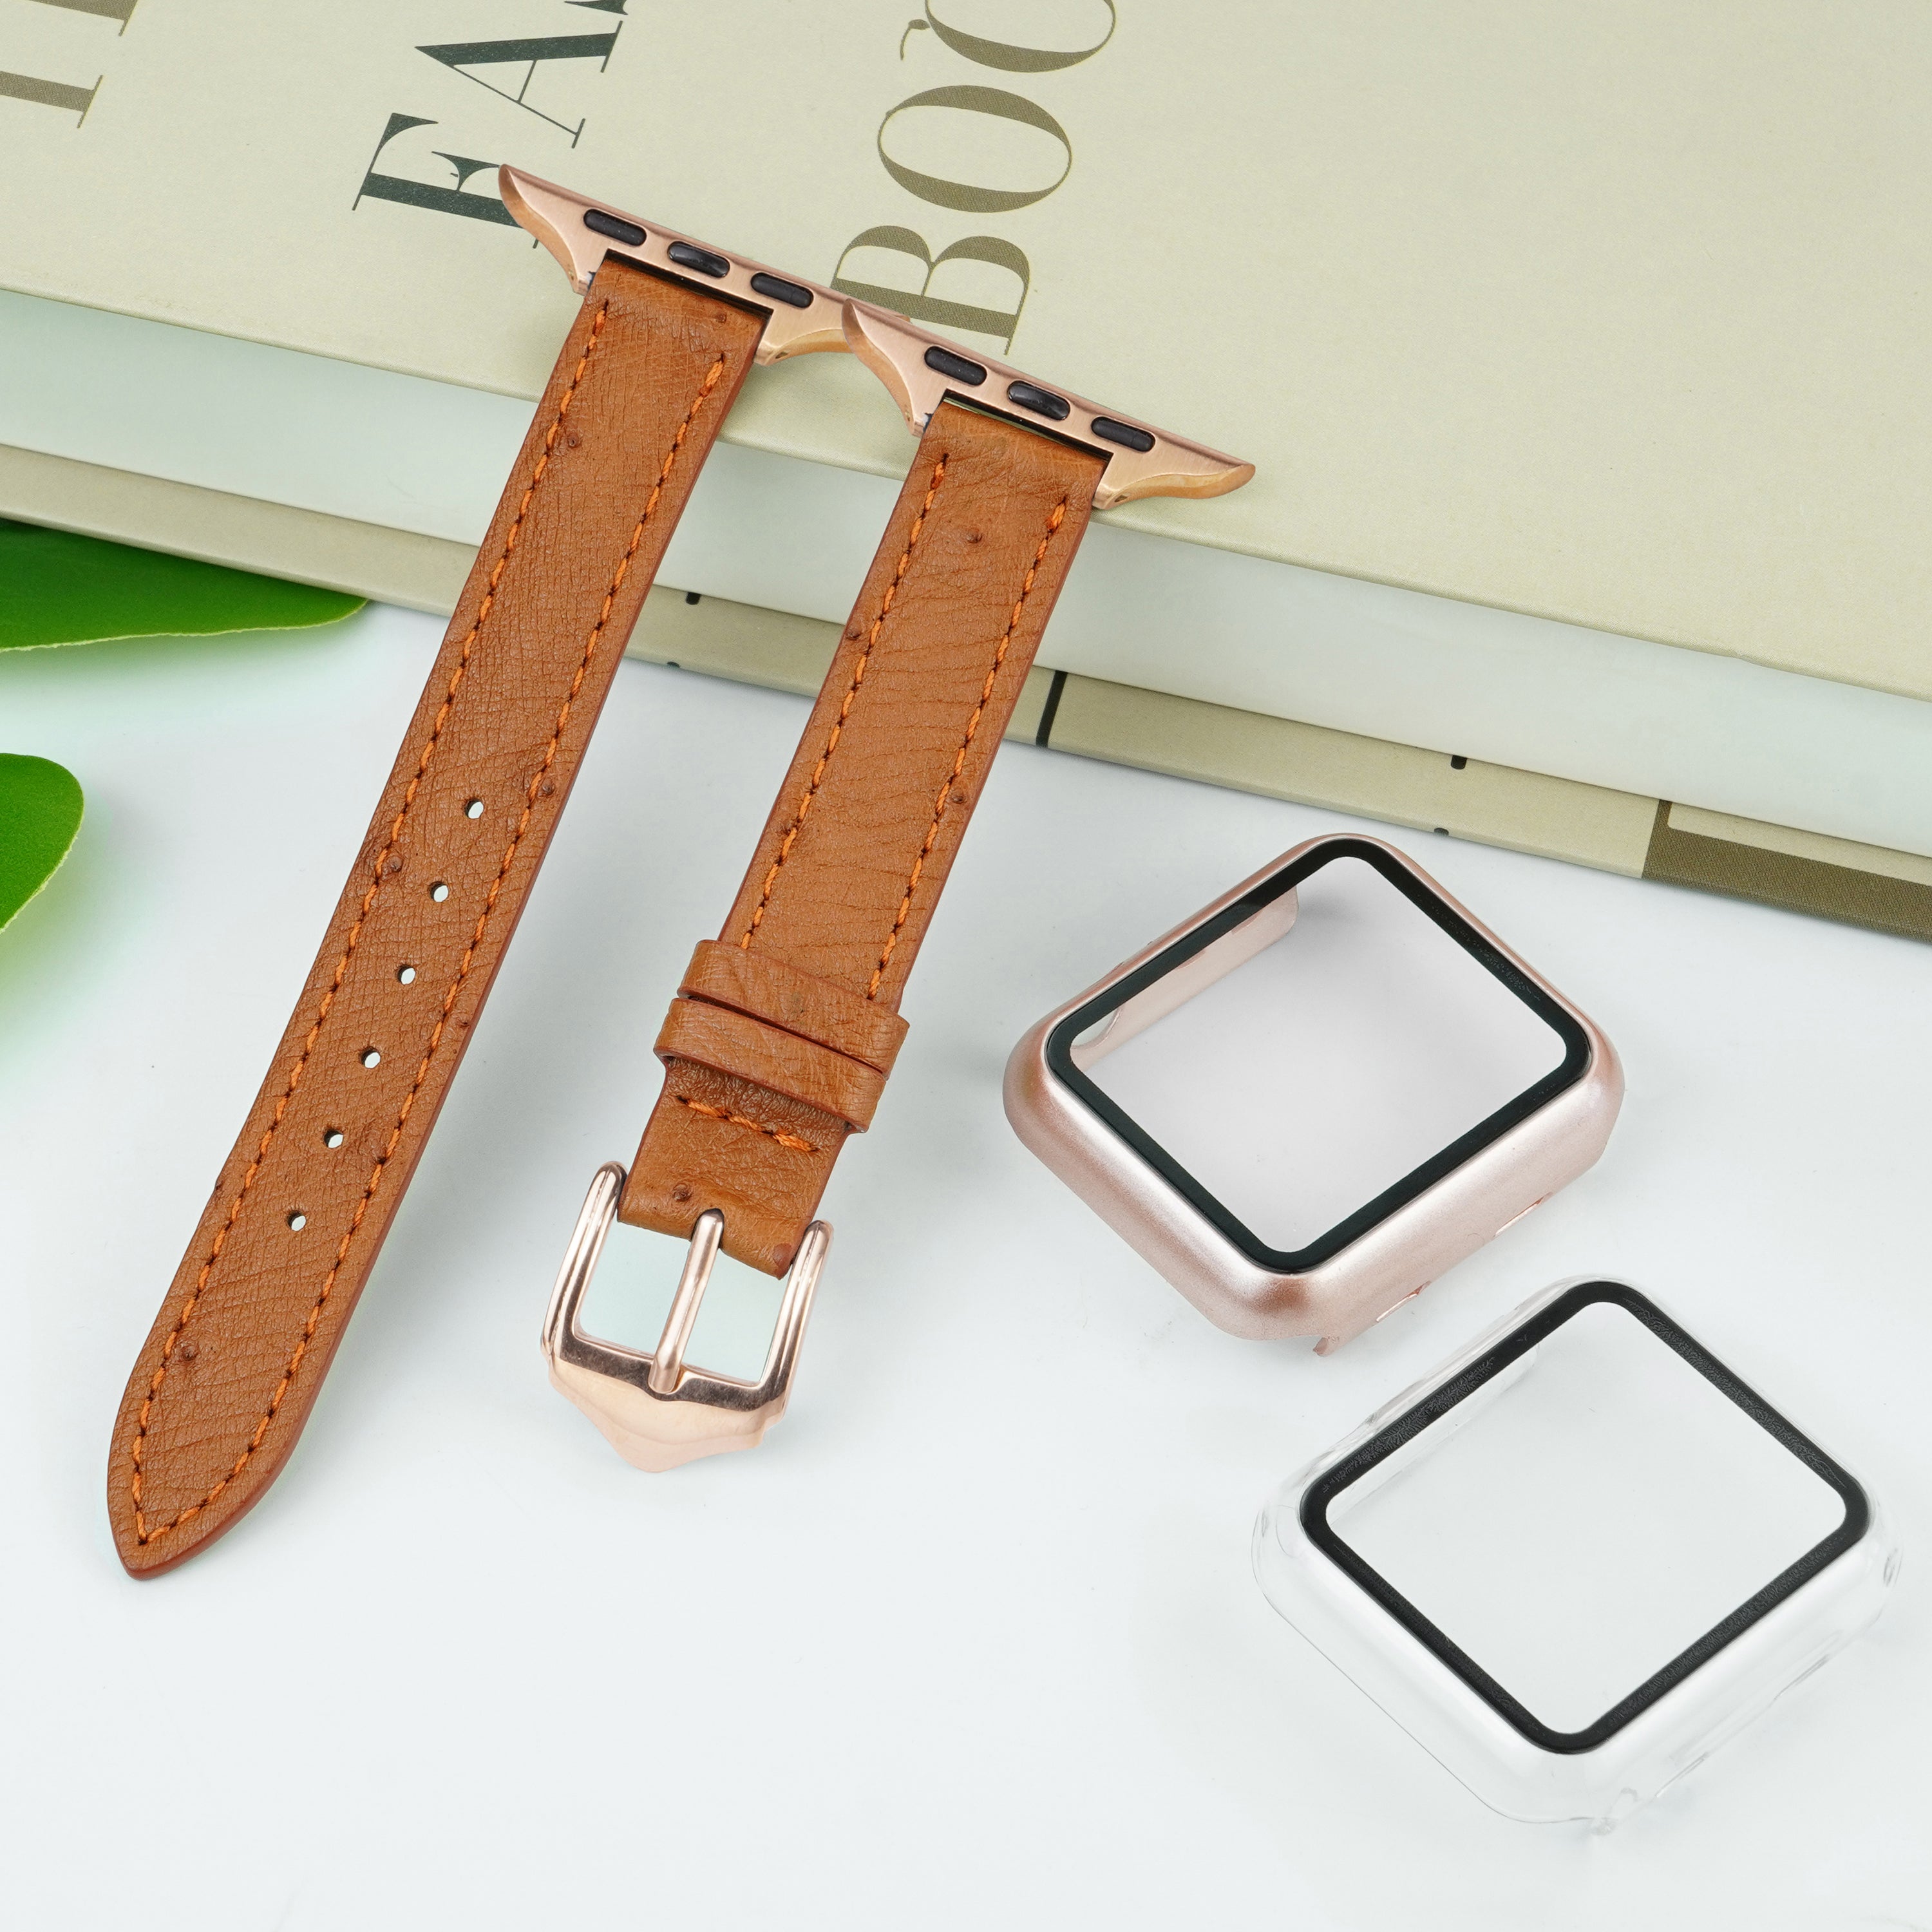 Light Brown Flat Ostrich Leather Band Compatible Apple Watch Iwatch 38mm Screen Protector Case Gold Adapter Replacement Strap For Smartwatch Series 1 2 3 Leather Handmade AW-186G-W-38MM